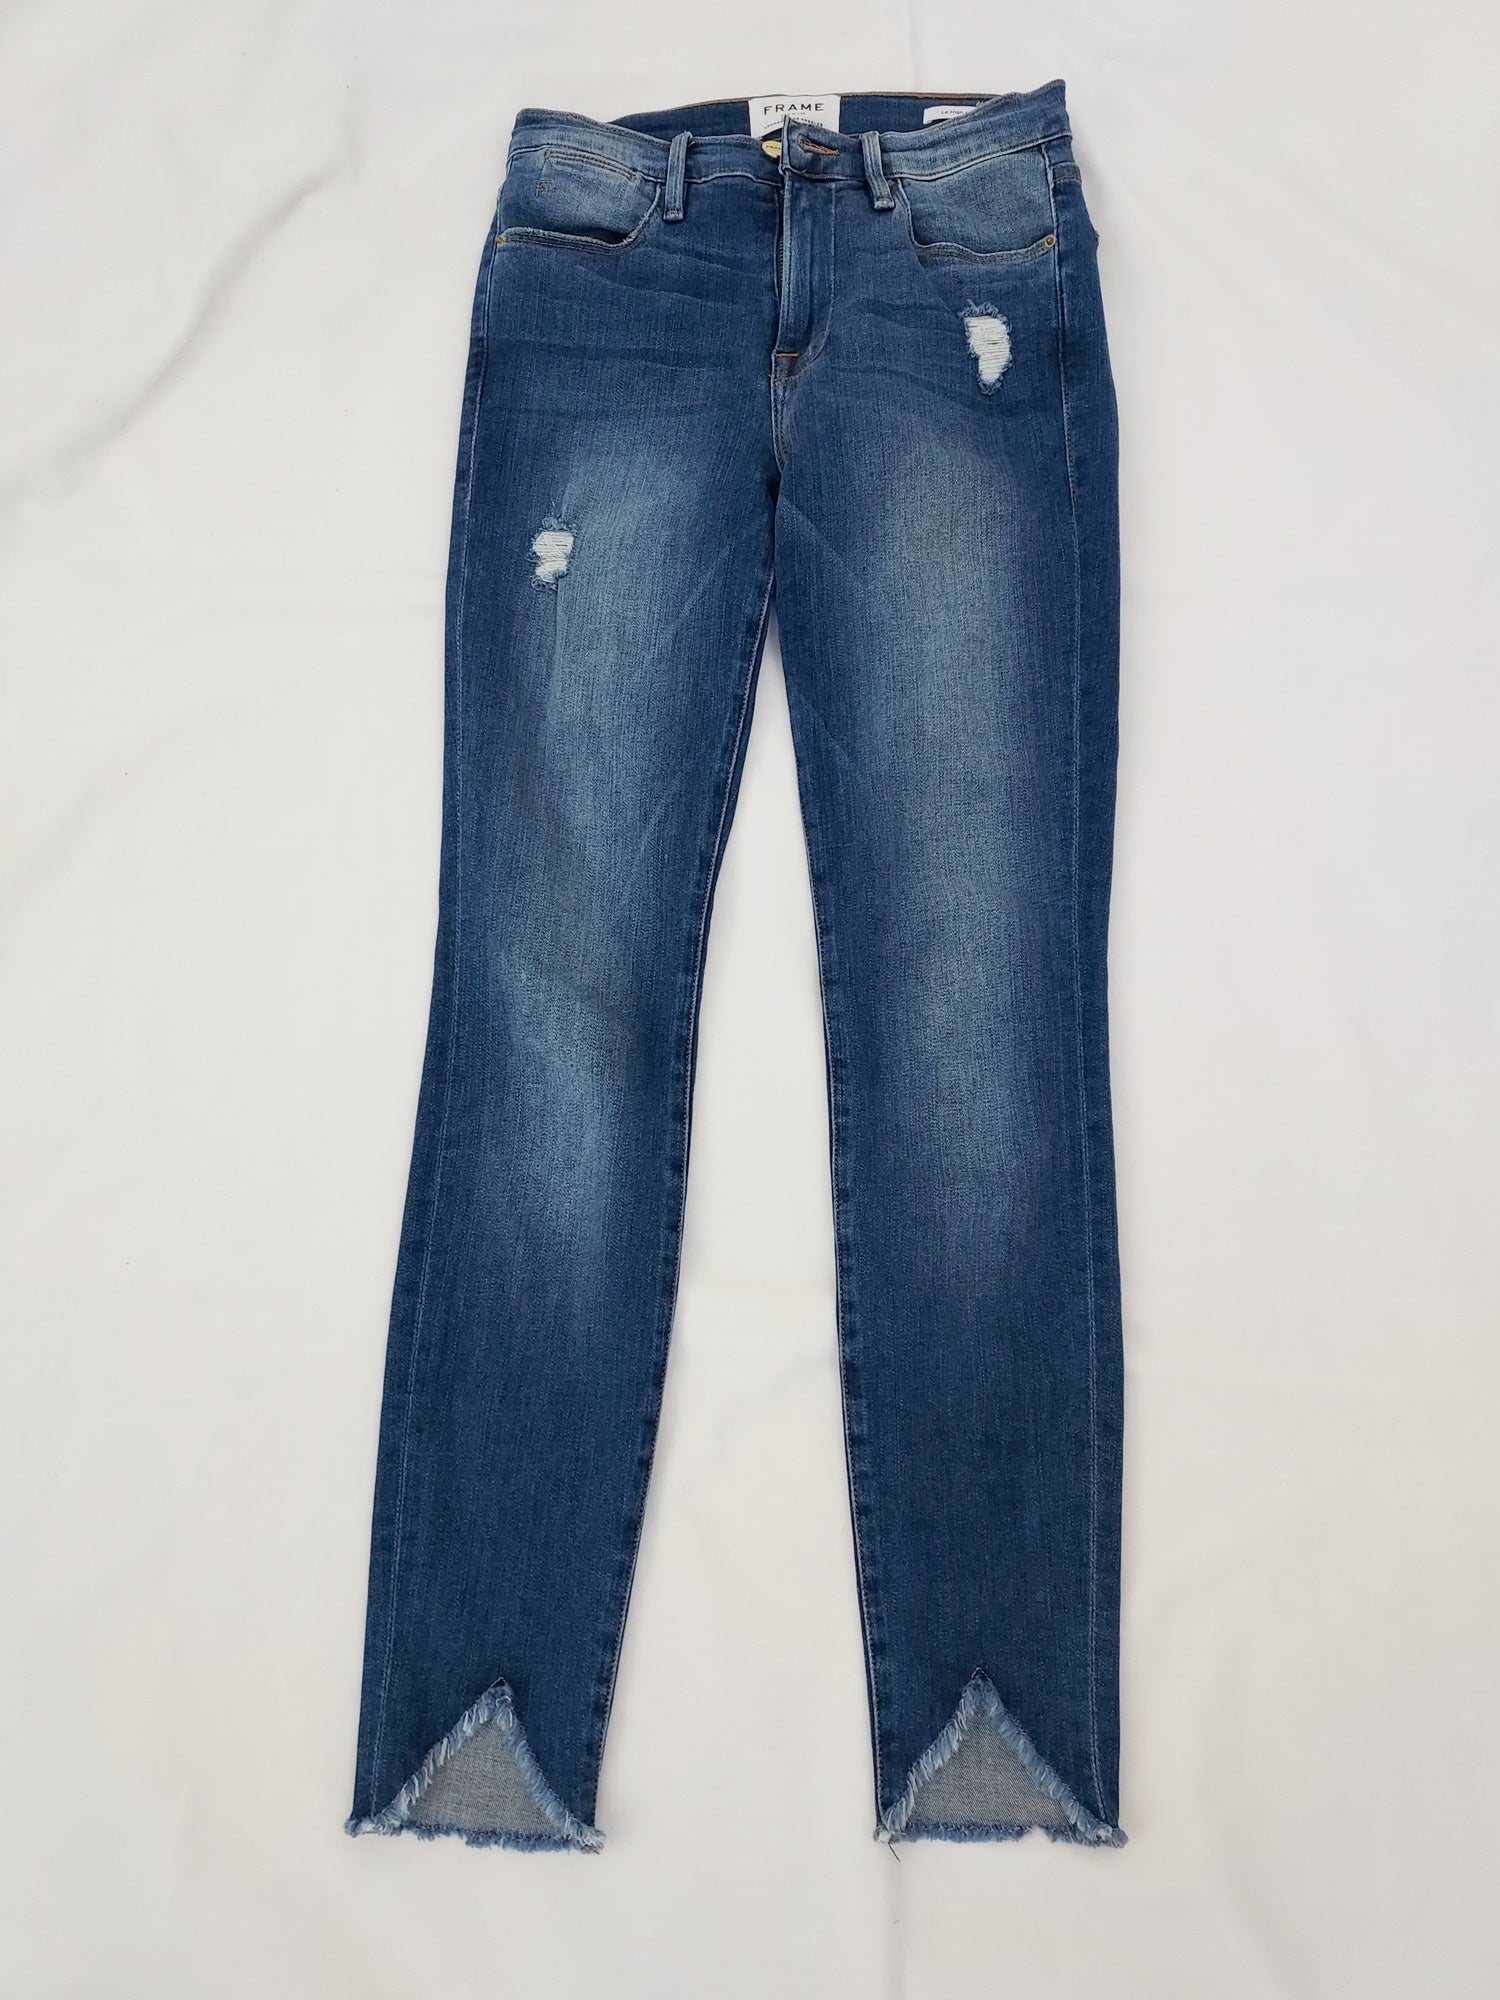 Le High Skinny Jeans Size 25